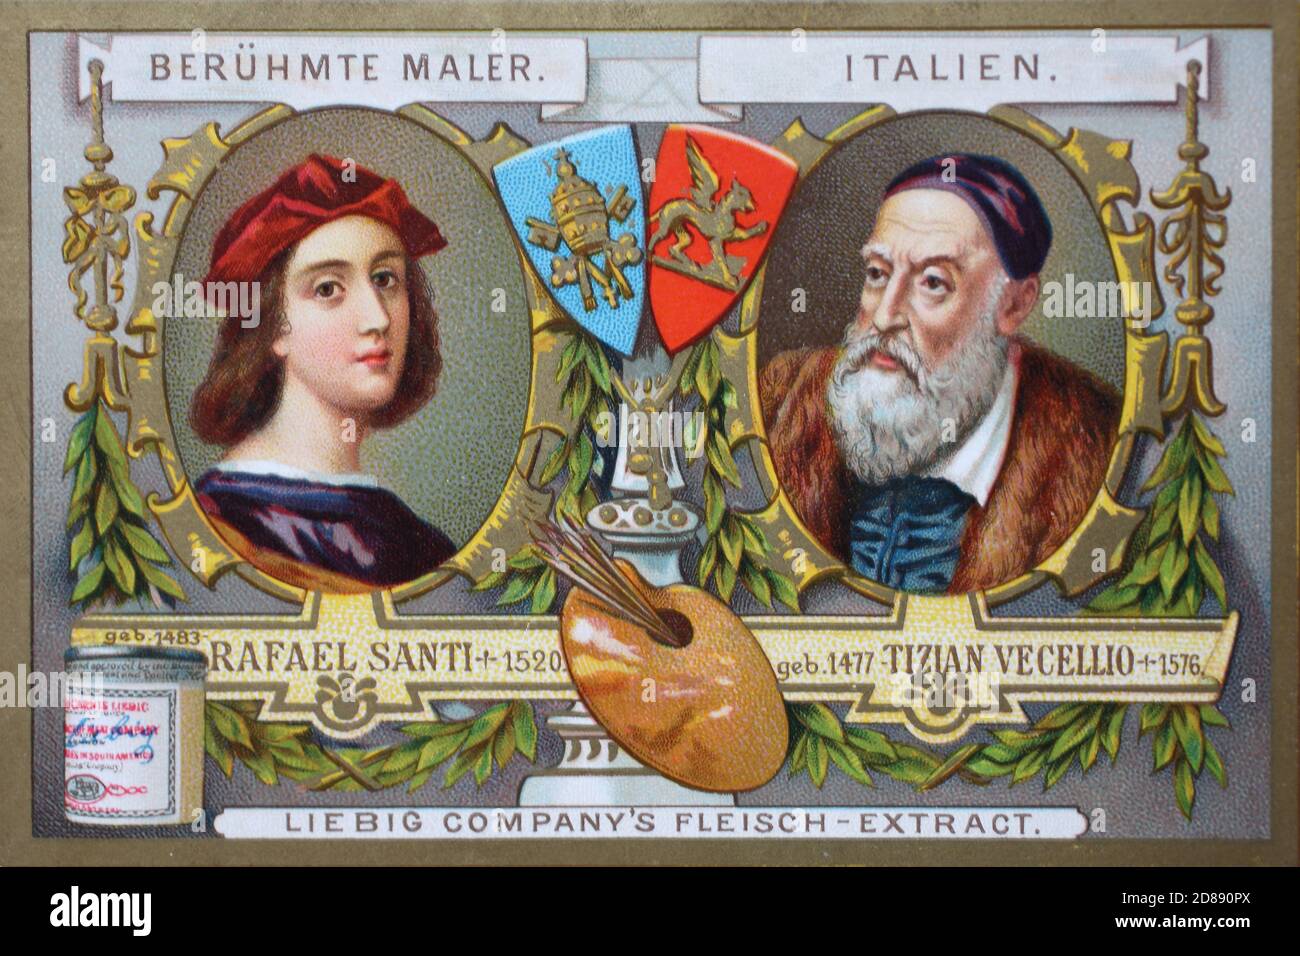 Picture series famous painters, Rafael Santi and Tiziano Vecellio, Italy  /  Bilderserie berühmte Maler, Rafael Santi und Tiziano Vecellio, Italien, Liebigbild, digital improved reproduction of a collectible image from the Liebig company, estimated from 1900, pd  /  digital verbesserte Reproduktion eines Sammelbildes von ca 1900, gemeinfrei, Stock Photo